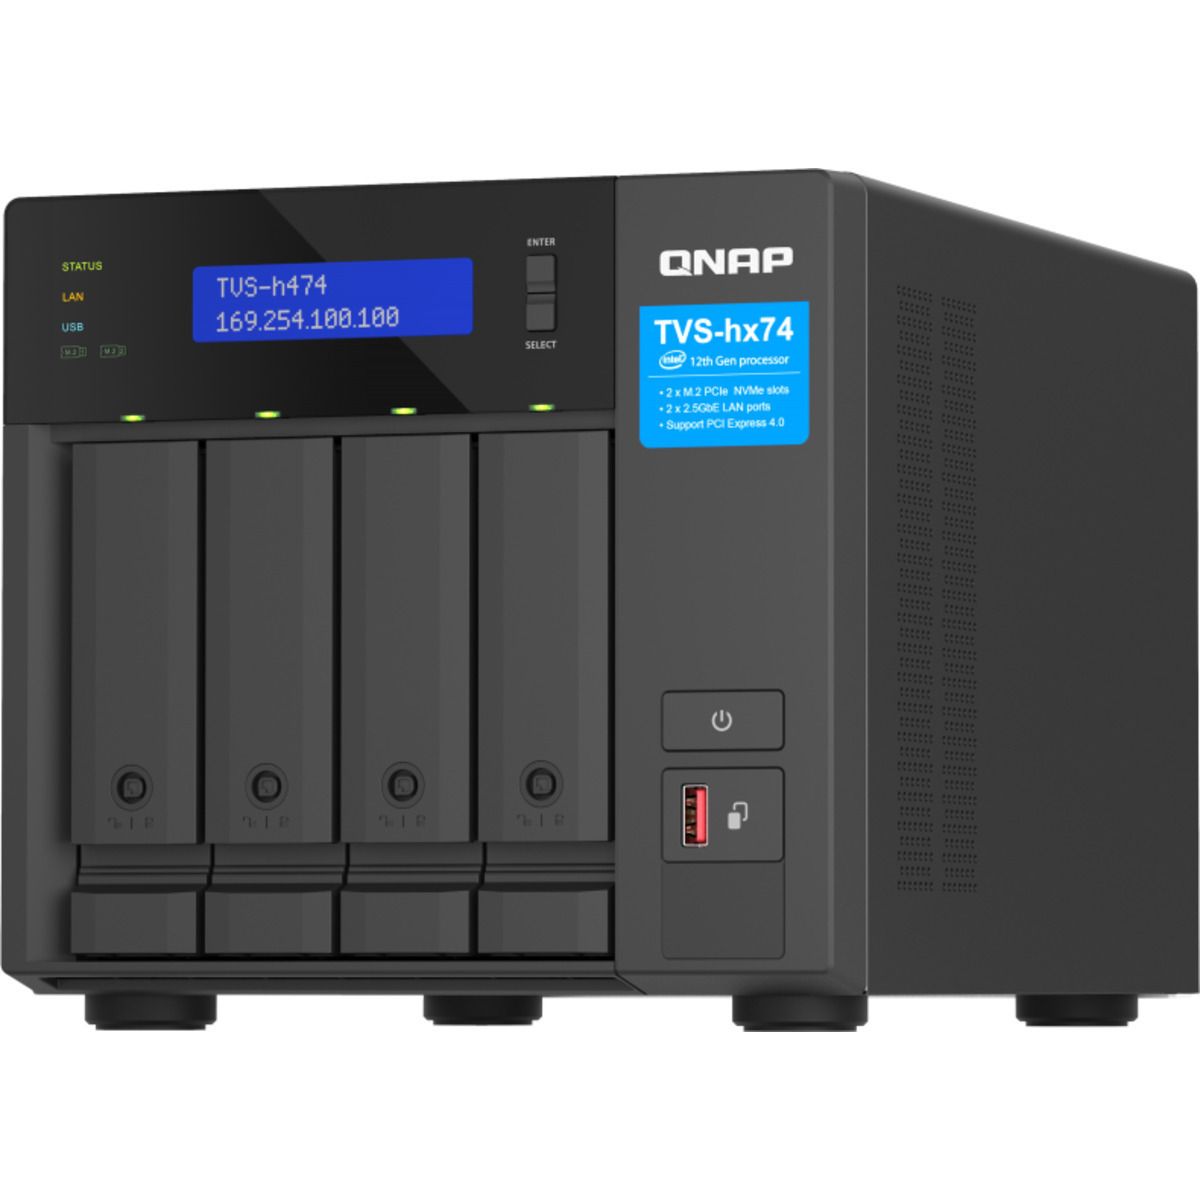 QNAP TVS-h474 Pentium Gold 30tb 4-Bay Desktop Multimedia / Power User / Business NAS - Network Attached Storage Device 3x10tb Western Digital Red Plus WD101EFBX 3.5 7200rpm SATA 6Gb/s HDD NAS Class Drives Installed - Burn-In Tested - FREE RAM UPGRADE TVS-h474 Pentium Gold